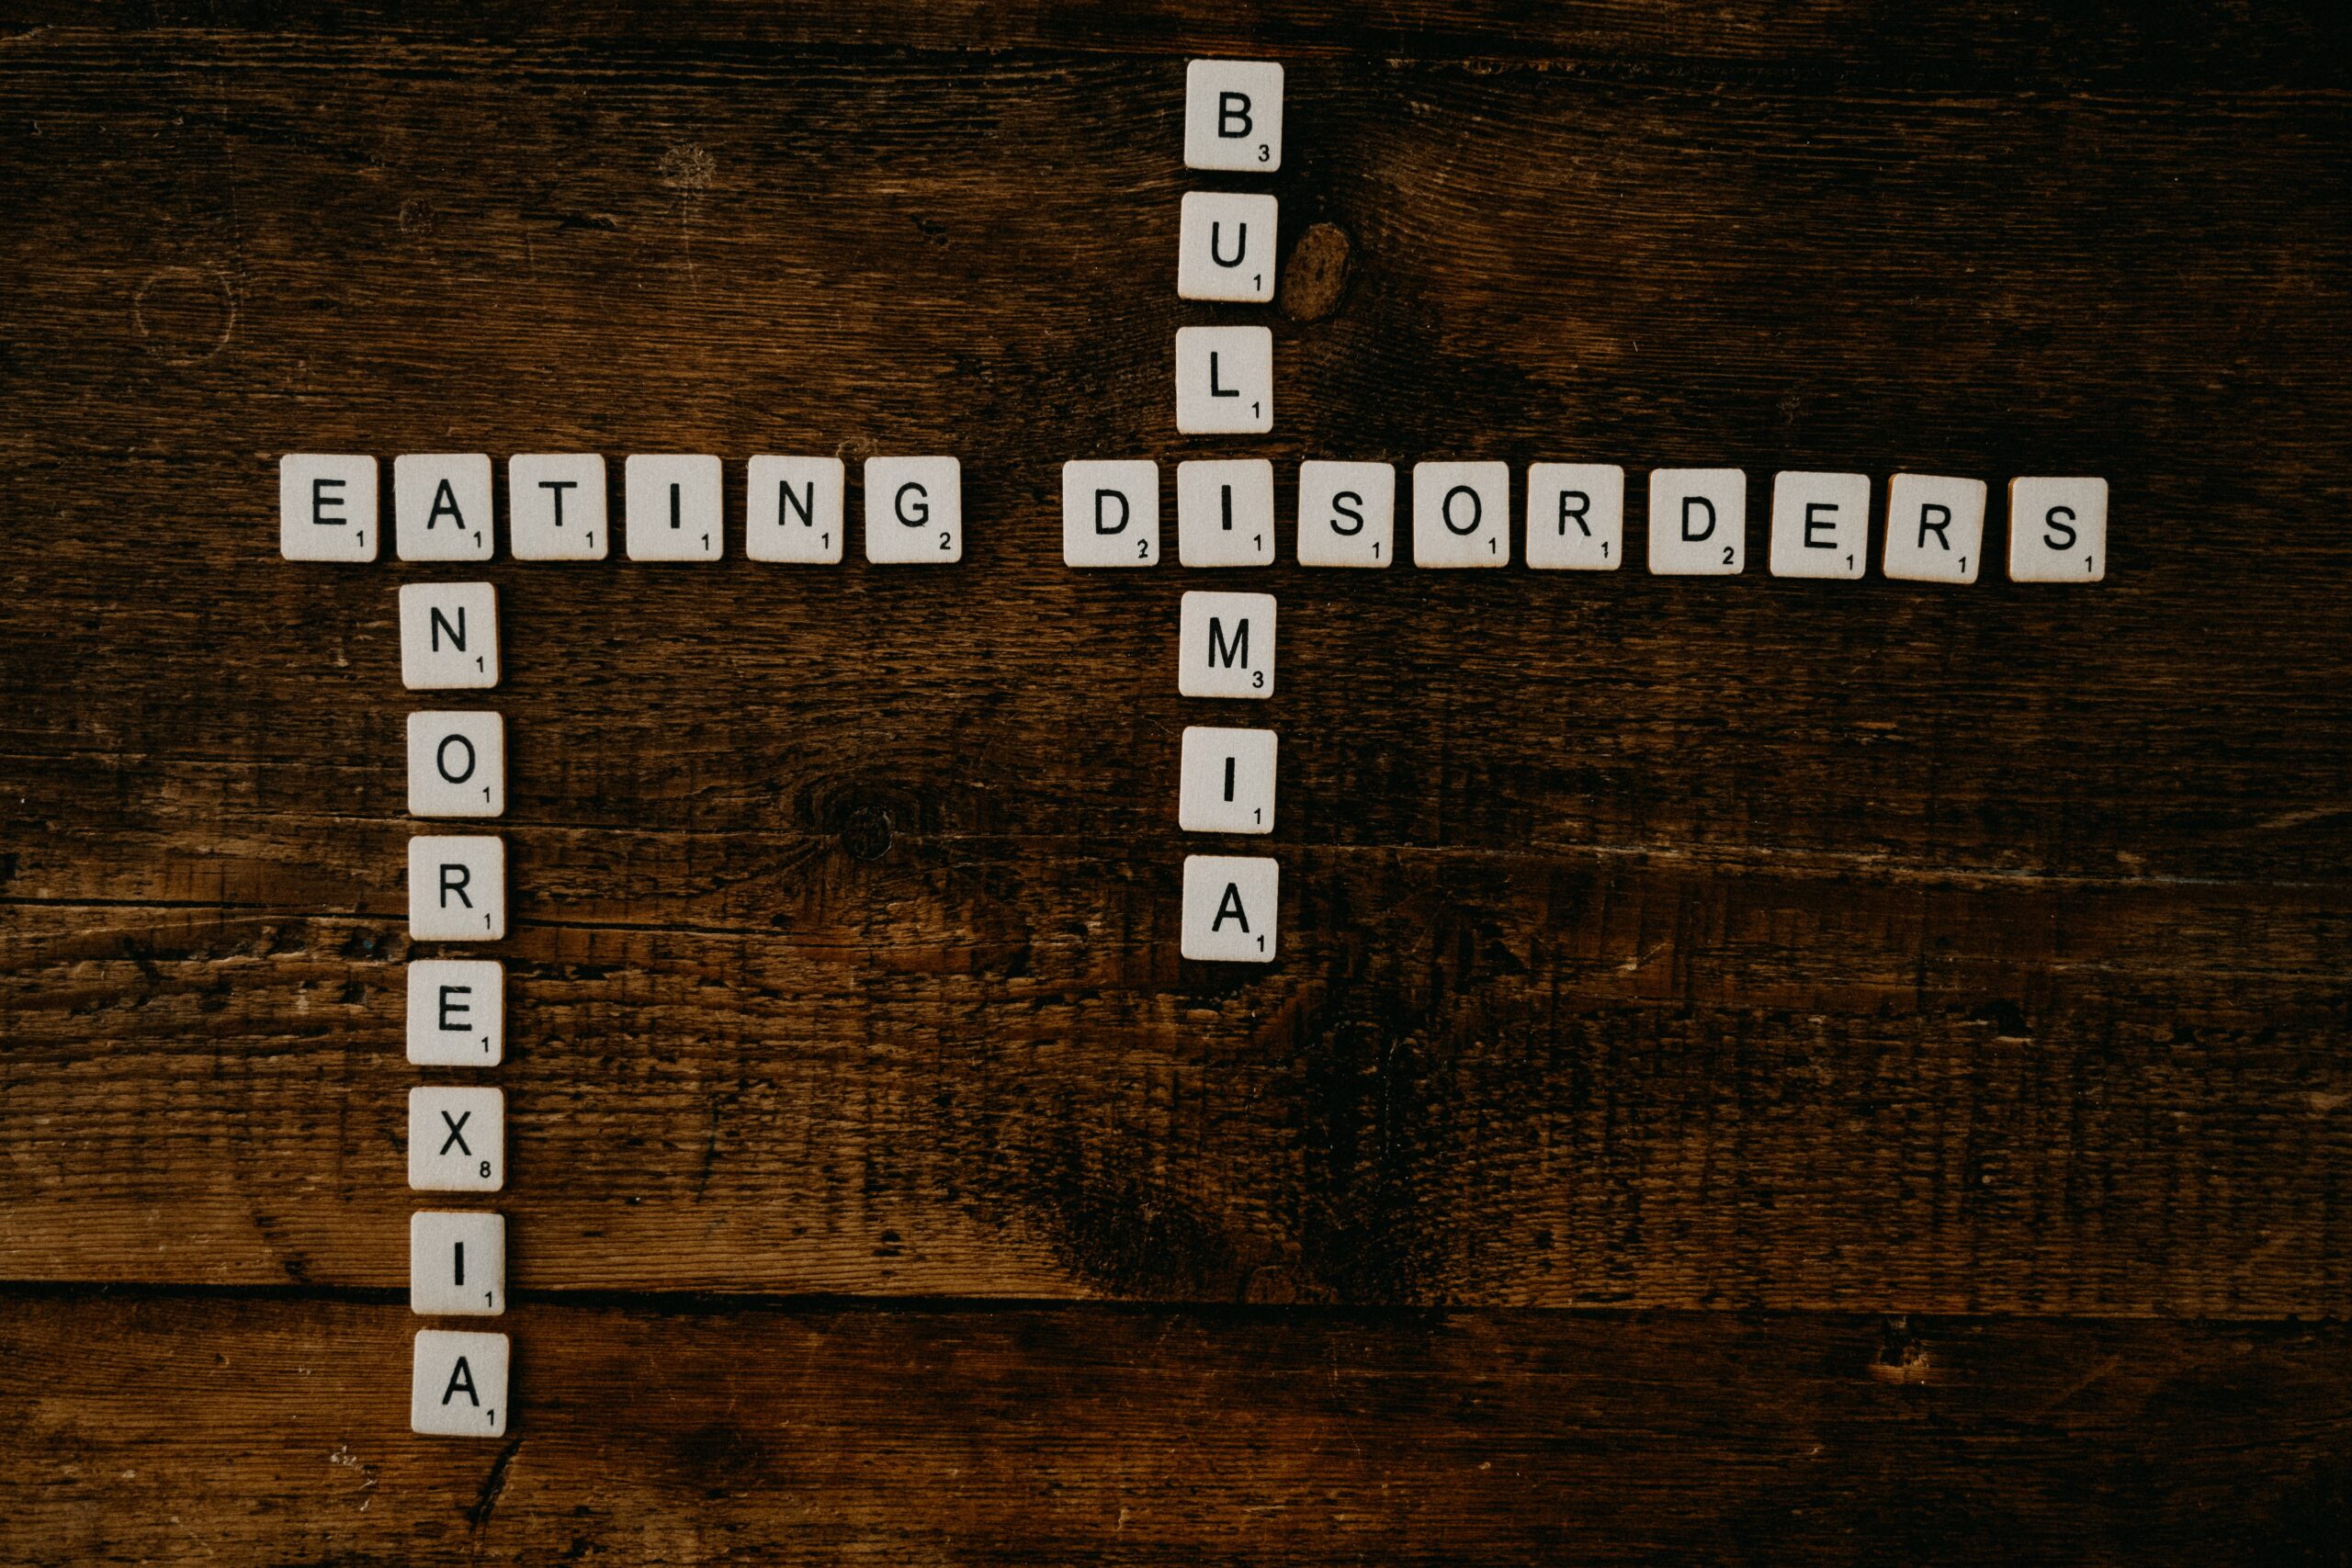 Scrabble Letters spelling the word Eating Disorders horizonatlly. The a in Eating spells anorexia vertiacally and the i in disorders is a part of the word bulimia spelled vertically